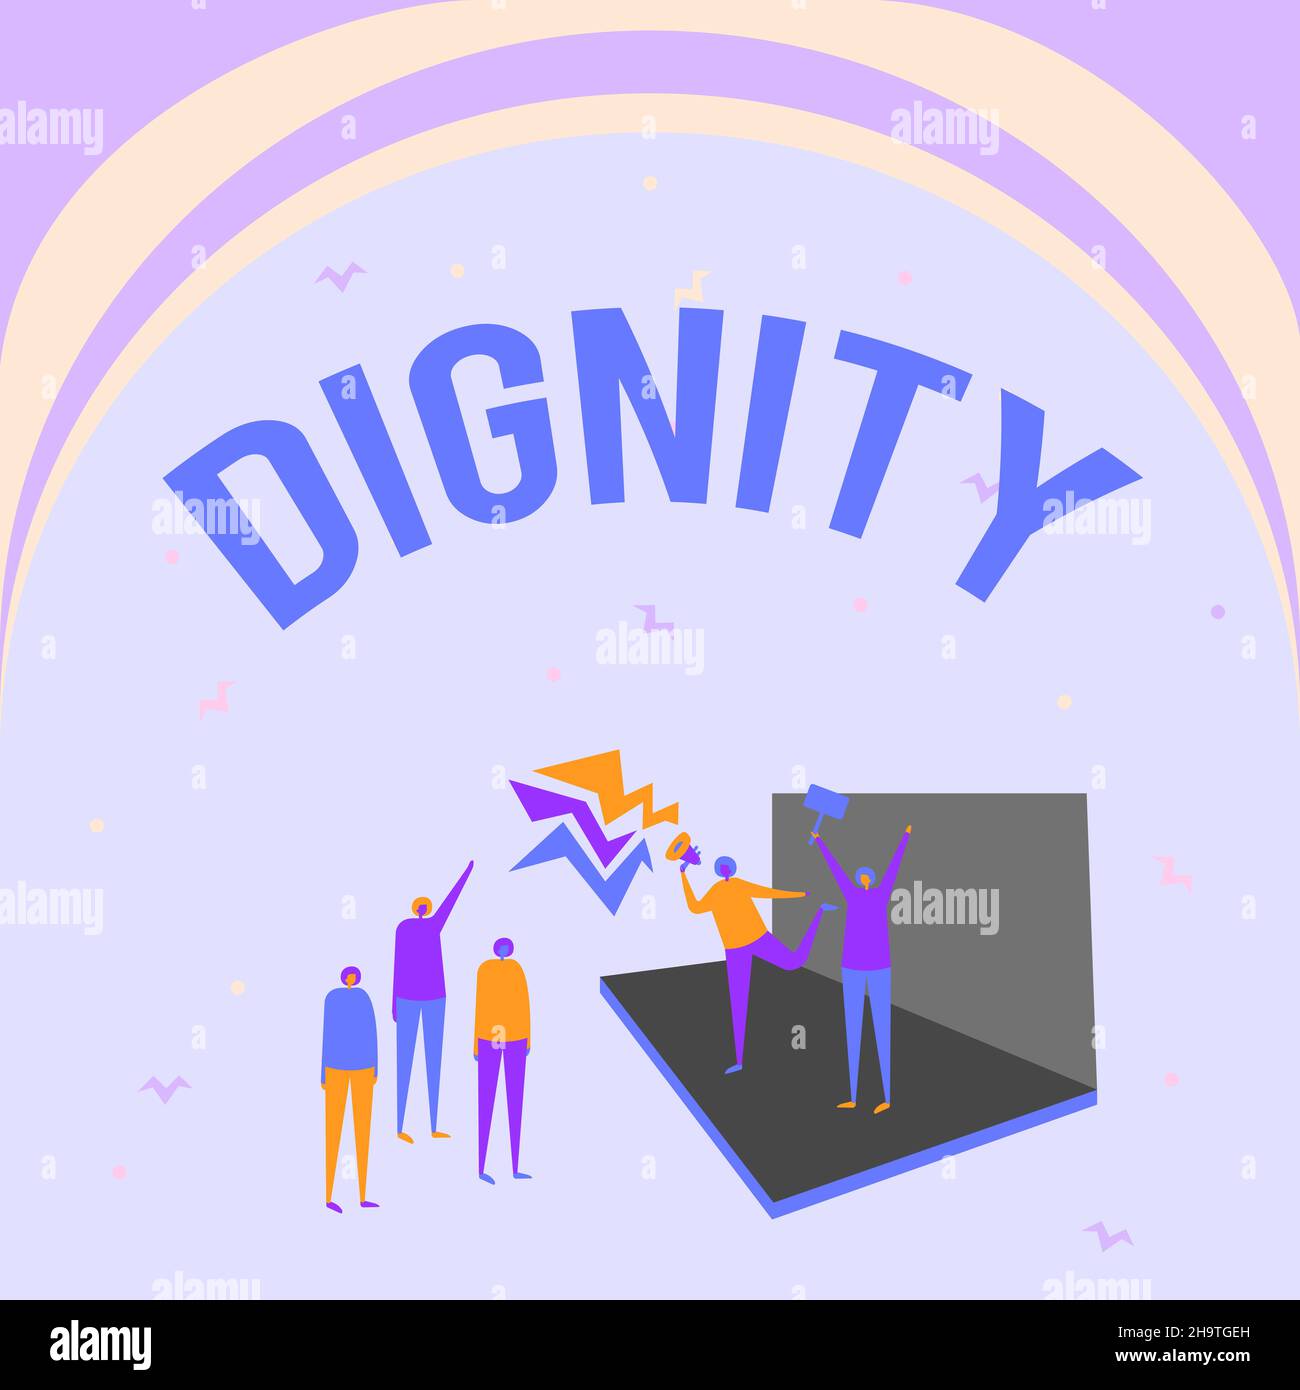 Meaning dignity